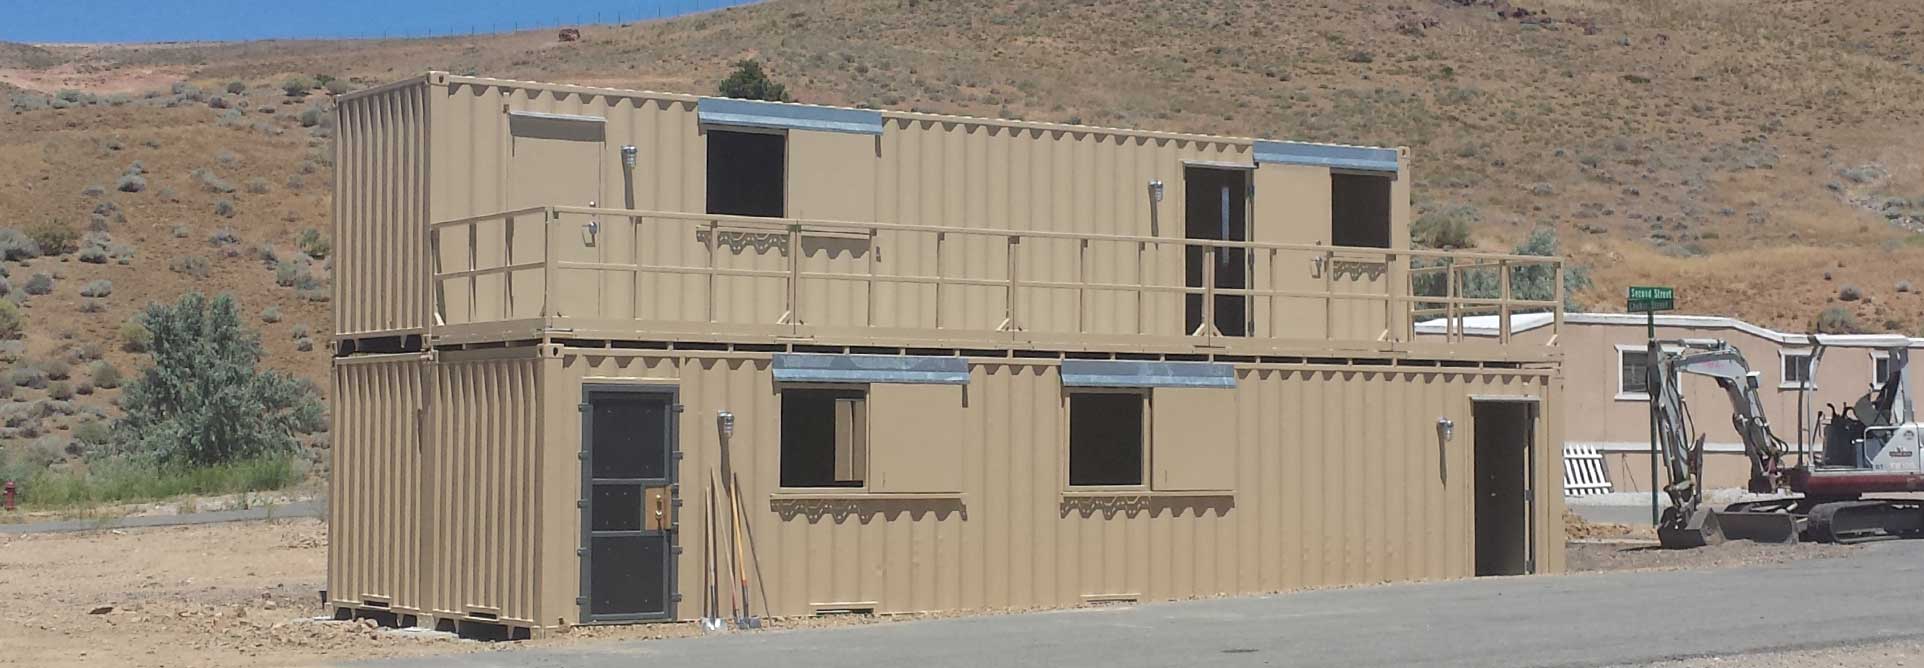 washoe_county_first_responder_training_facility_exterior